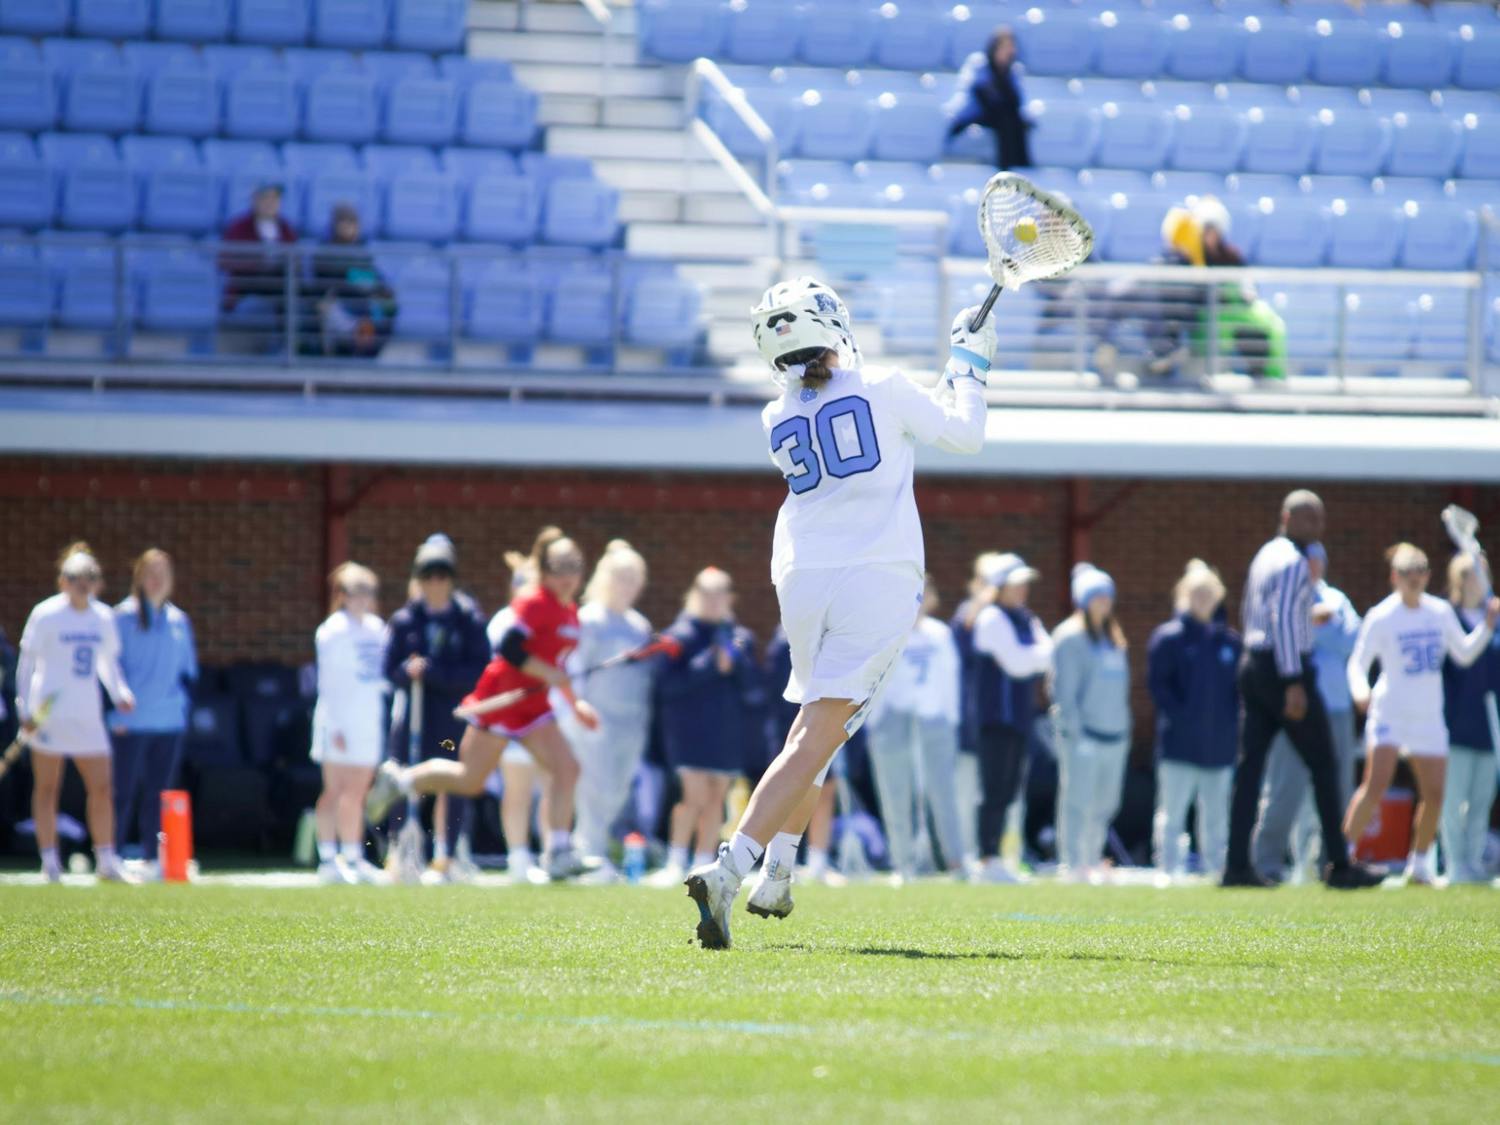 Goalkeeper Taylor Moreno (30) passes the ball back to a teammate after preventing Louisville from scoring at a home game. The Heels won 21-8 on Sunday, March 13, 2022.